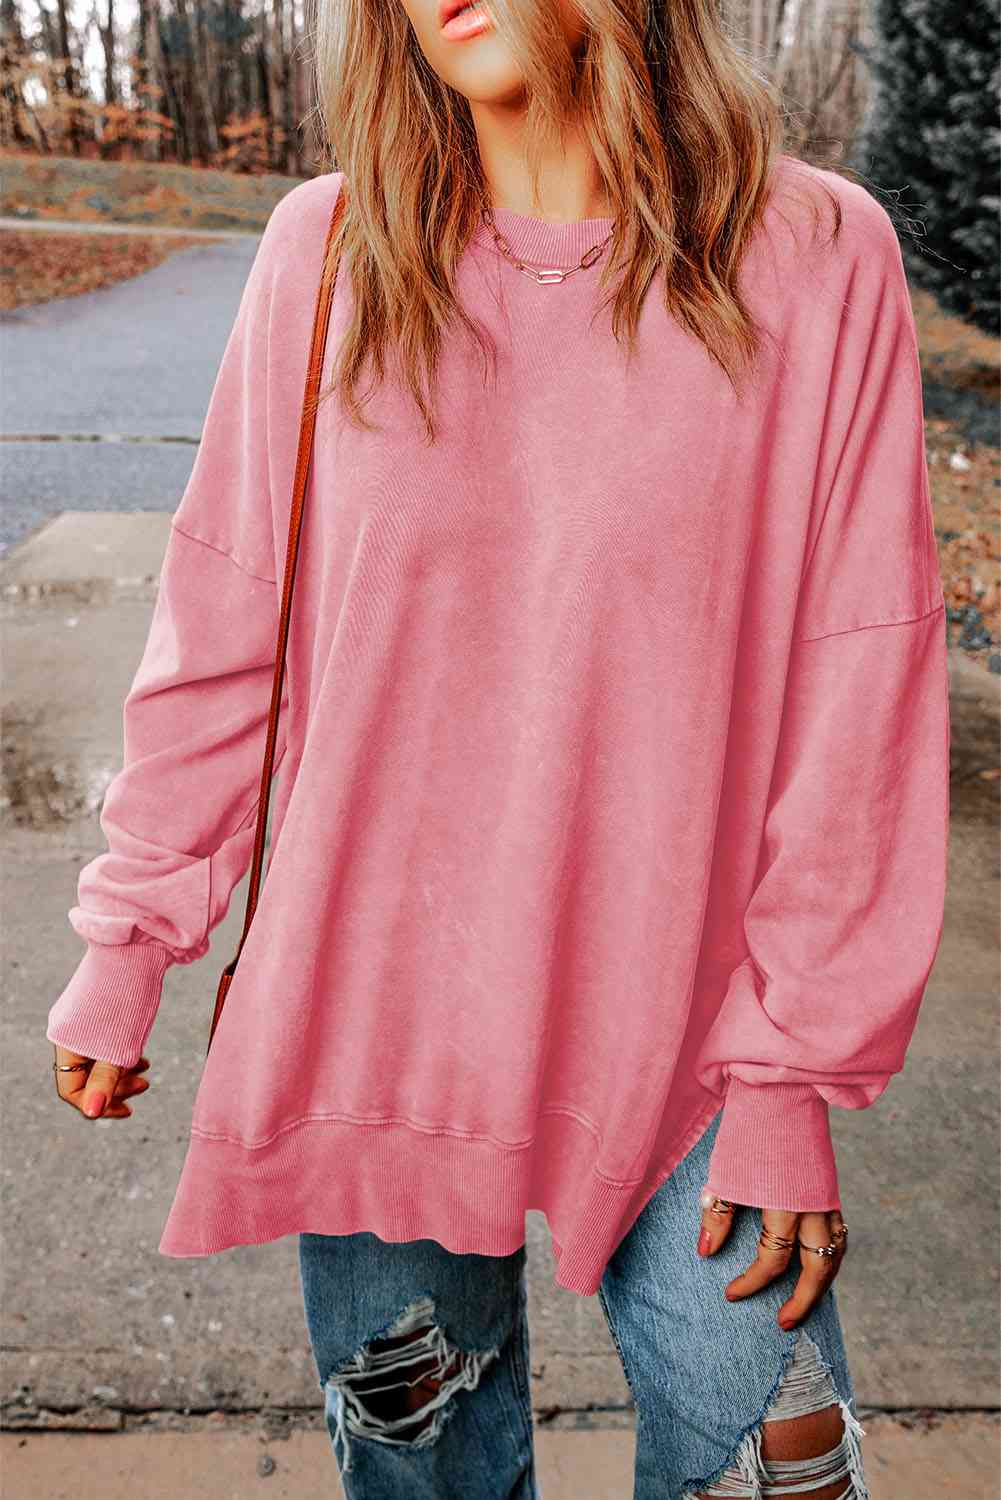 Dropped Shoulder Round Neck Long Sleeve Blouse (5 Colors) Shirts & Tops Krazy Heart Designs Boutique Carnation Pink S 